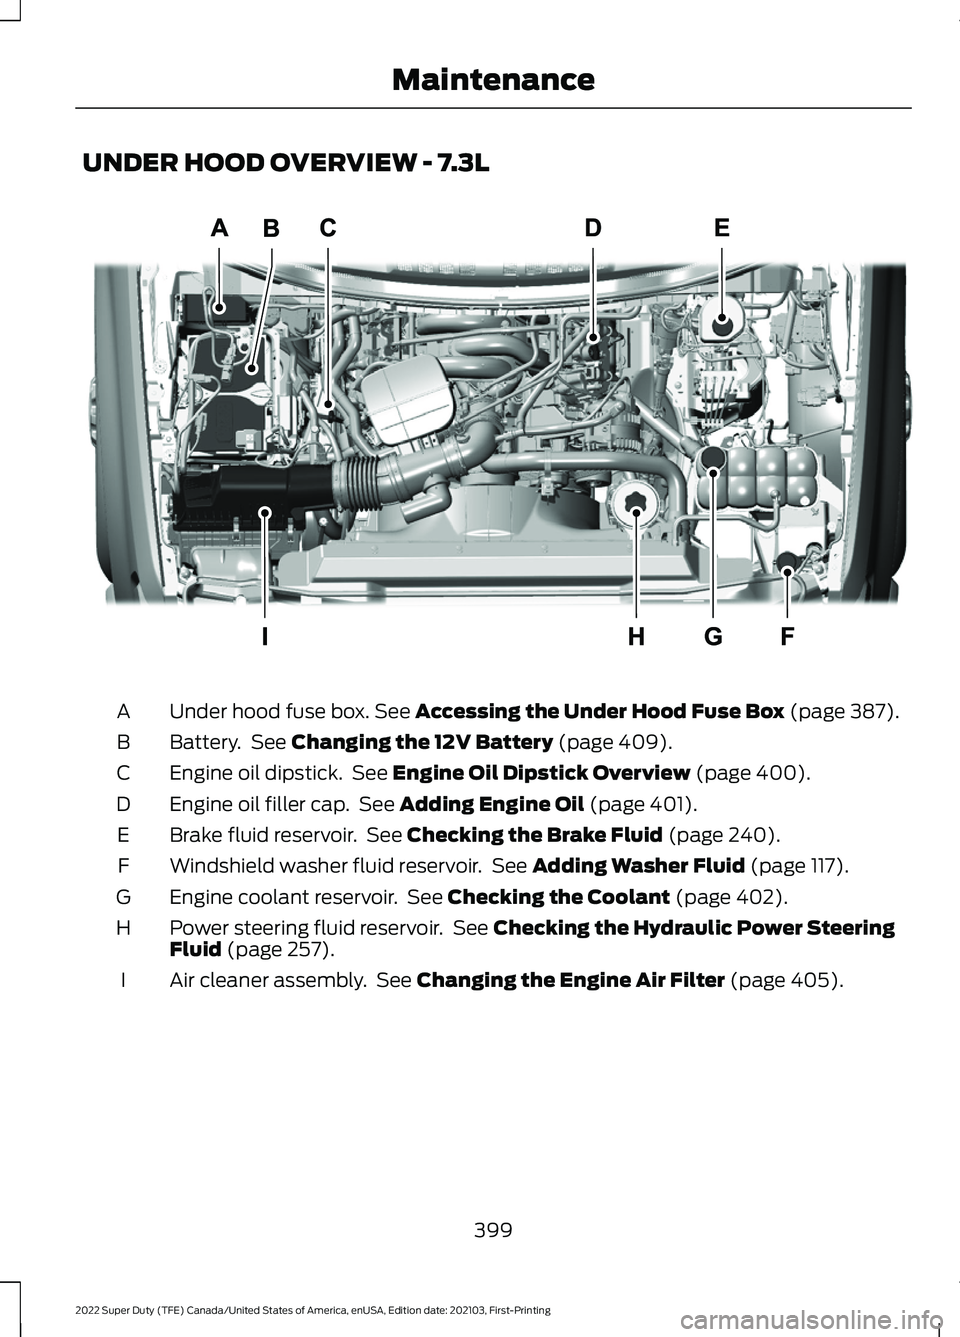 FORD F-450 2022  Owners Manual UNDER HOOD OVERVIEW - 7.3L
Under hood fuse box. See Accessing the Under Hood Fuse Box (page 387).
A
Battery.  See 
Changing the 12V Battery (page 409).
B
Engine oil dipstick.  See 
Engine Oil Dipstick